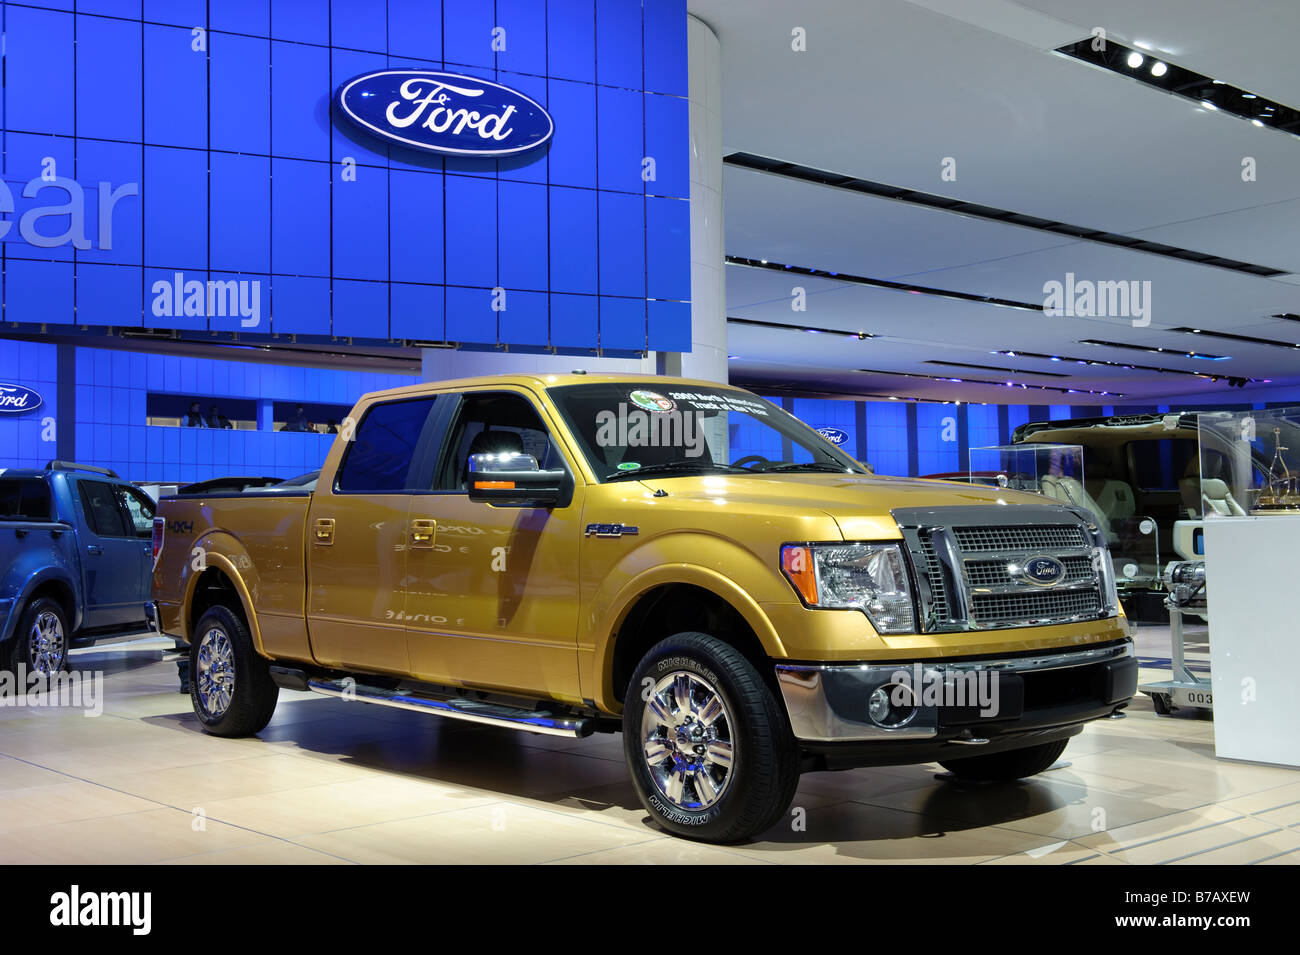 2009 Ford F-150 at the 2009 North American International Auto Show in Detroit Michigan USA Stock Photo